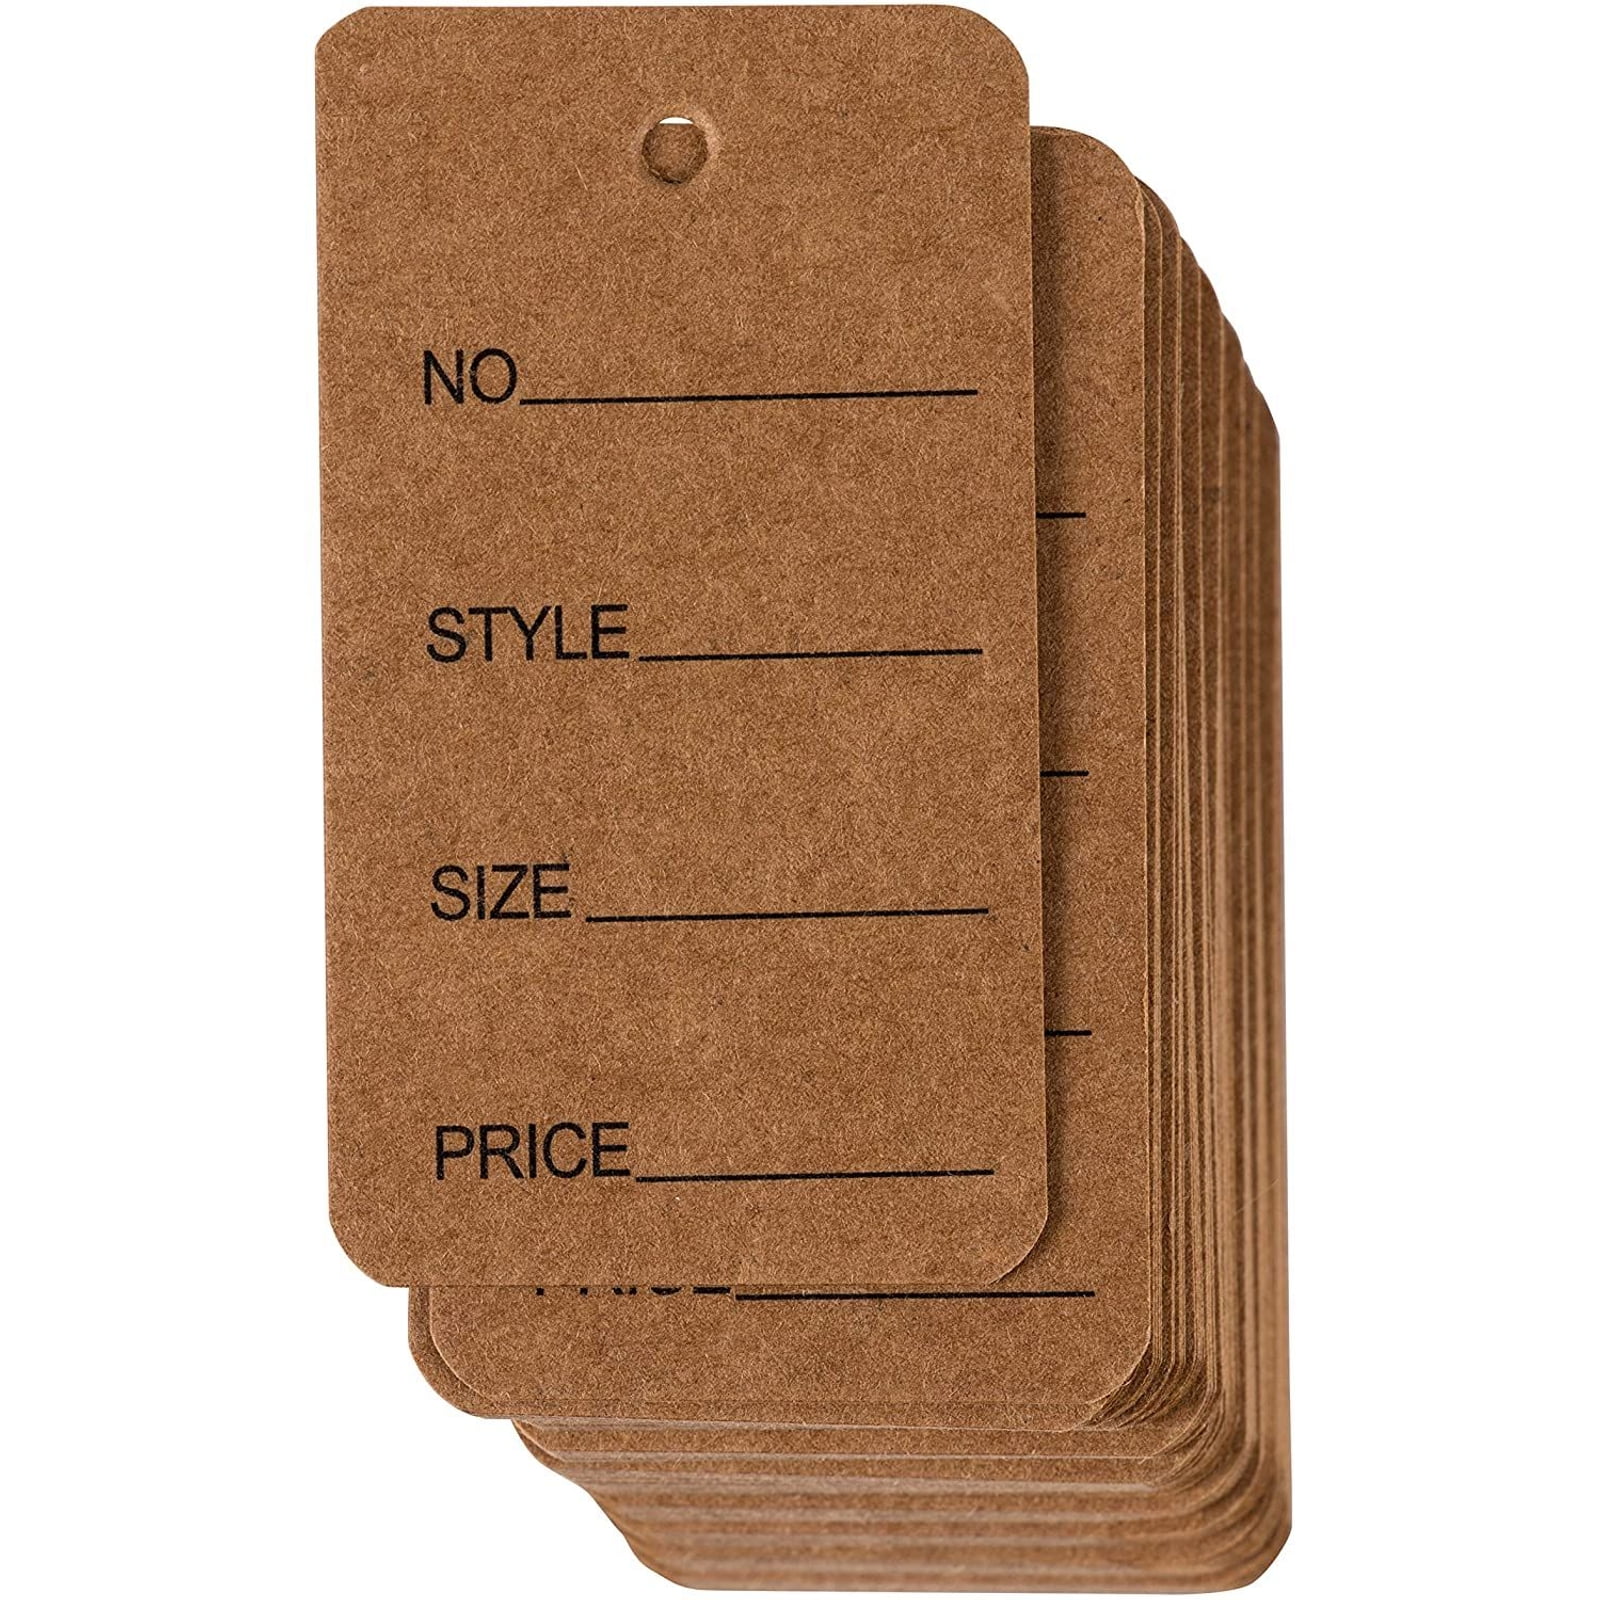 100 CREAM STRUNG PRICE TAGS 48MM X 30MM SWING TICKETS 